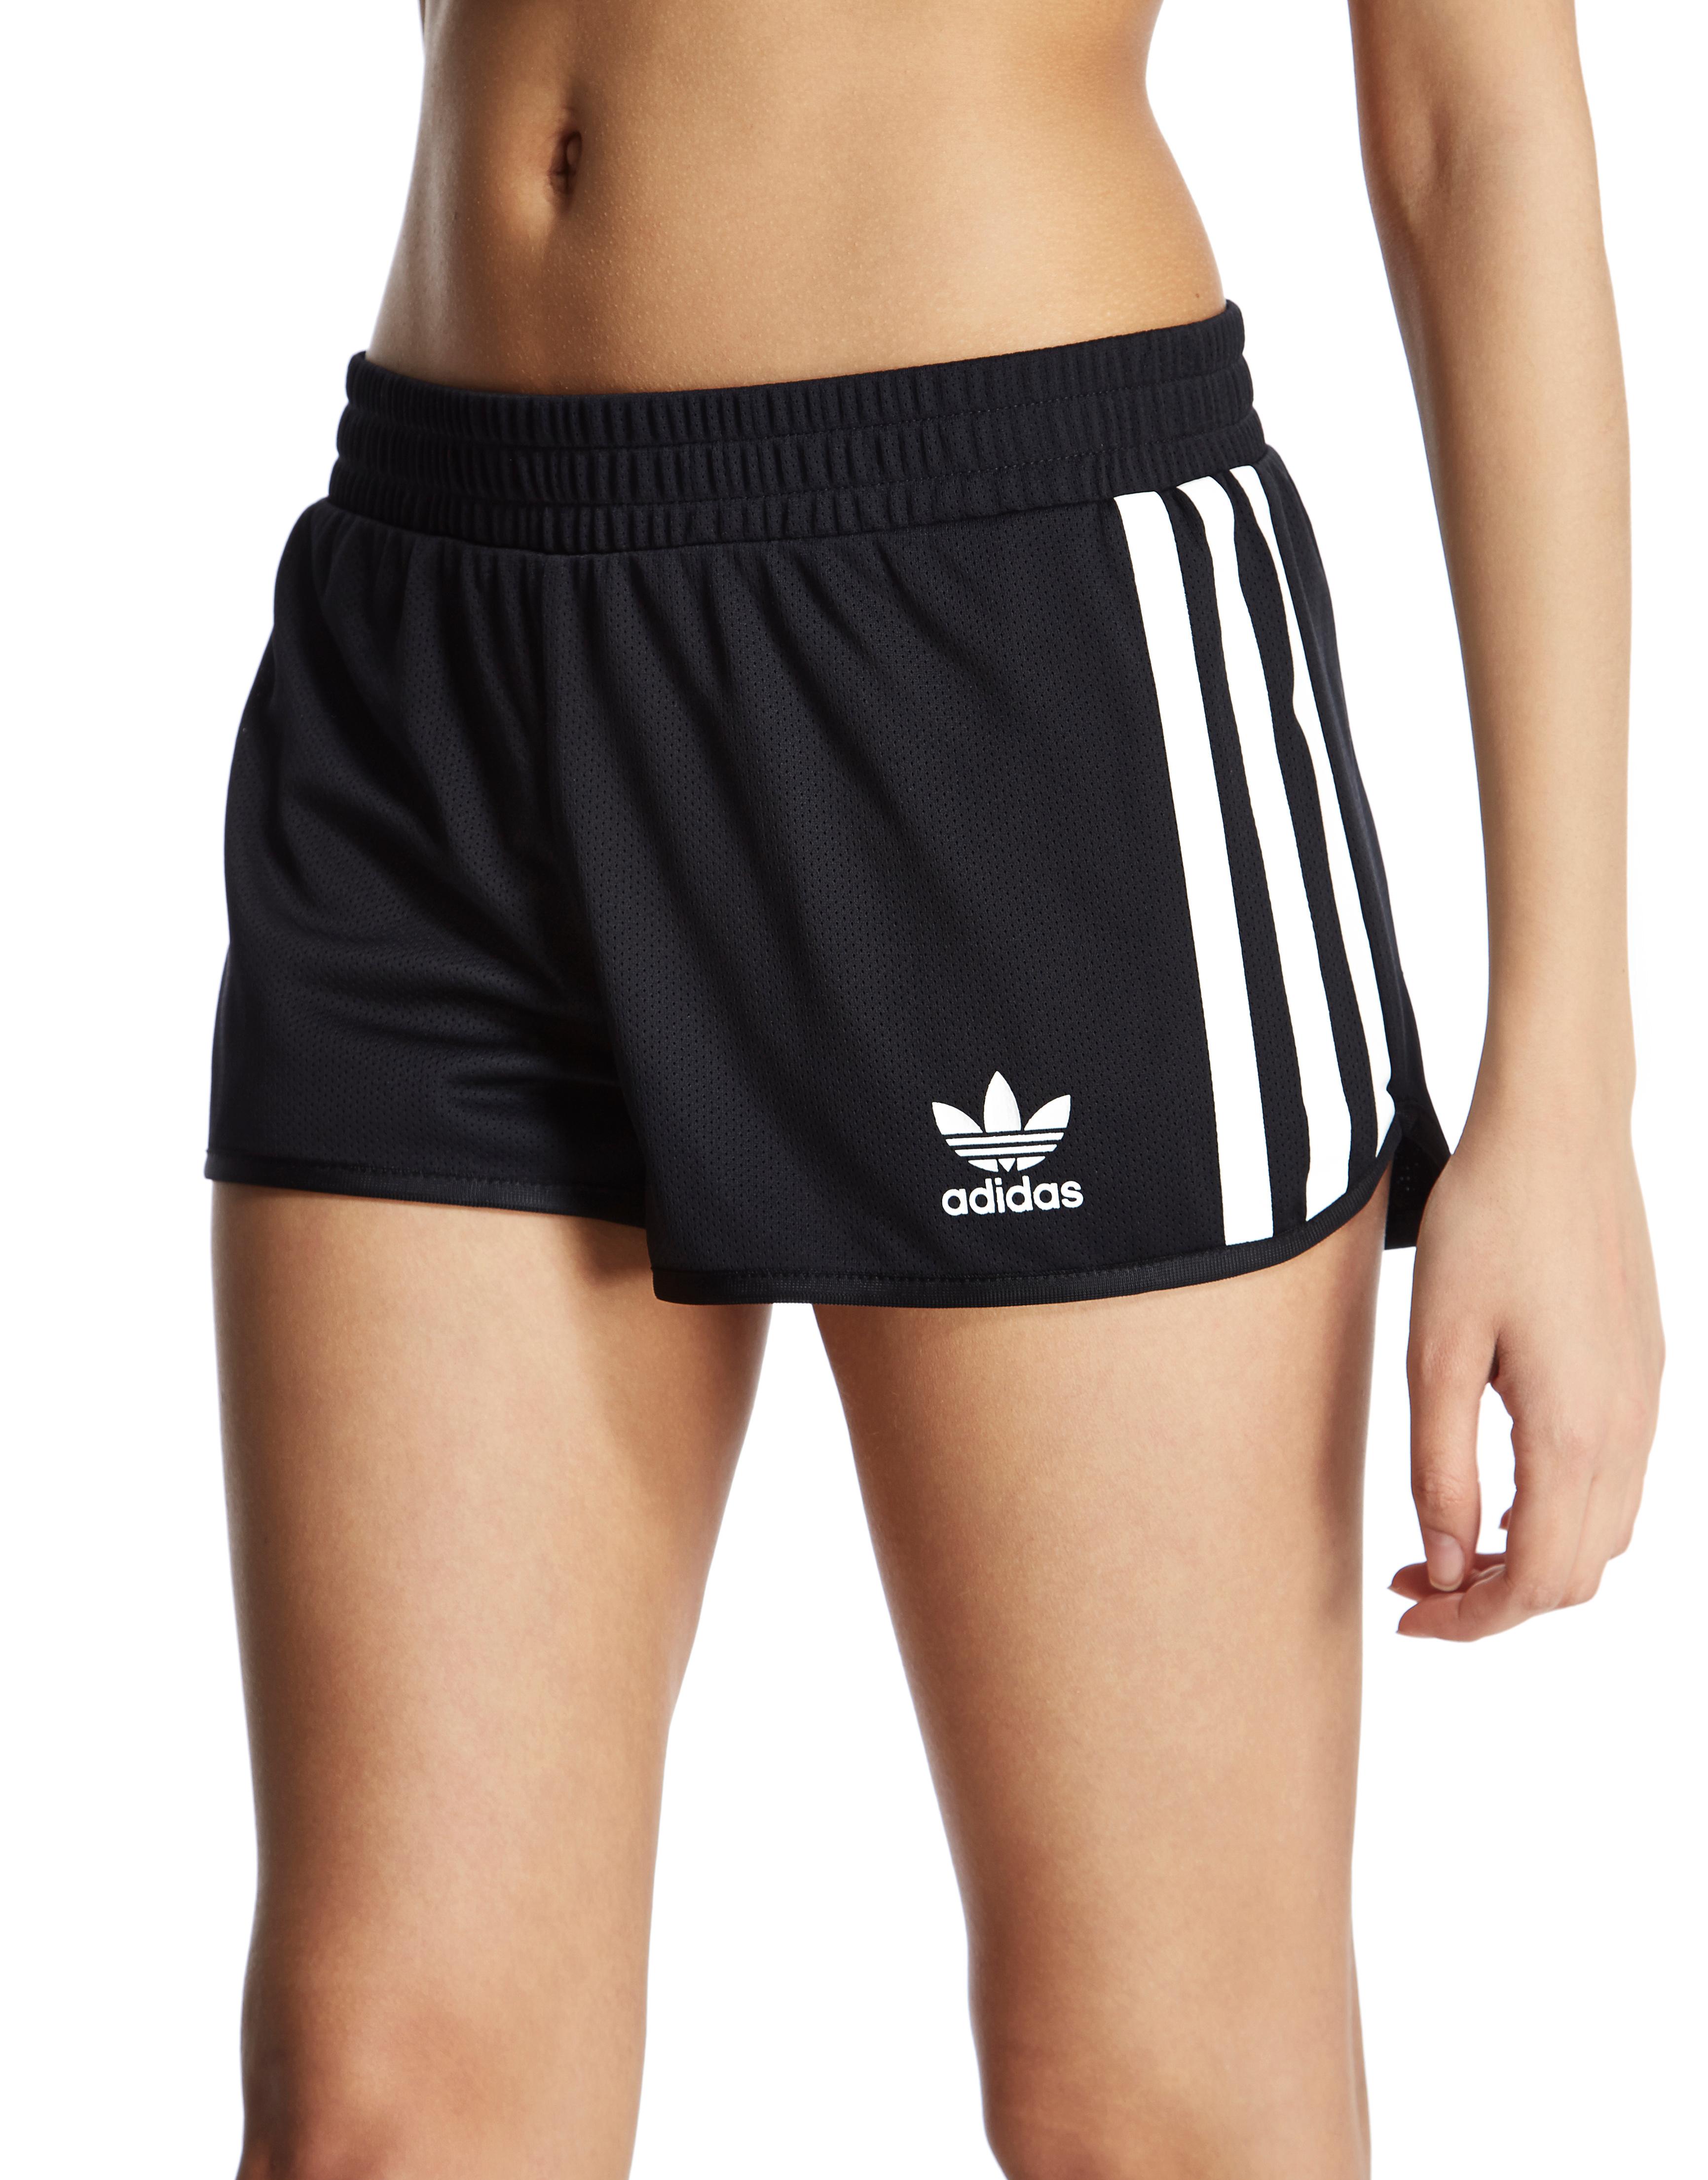 Where can I buy these Adidas originals 3 stripe booty shorts? #